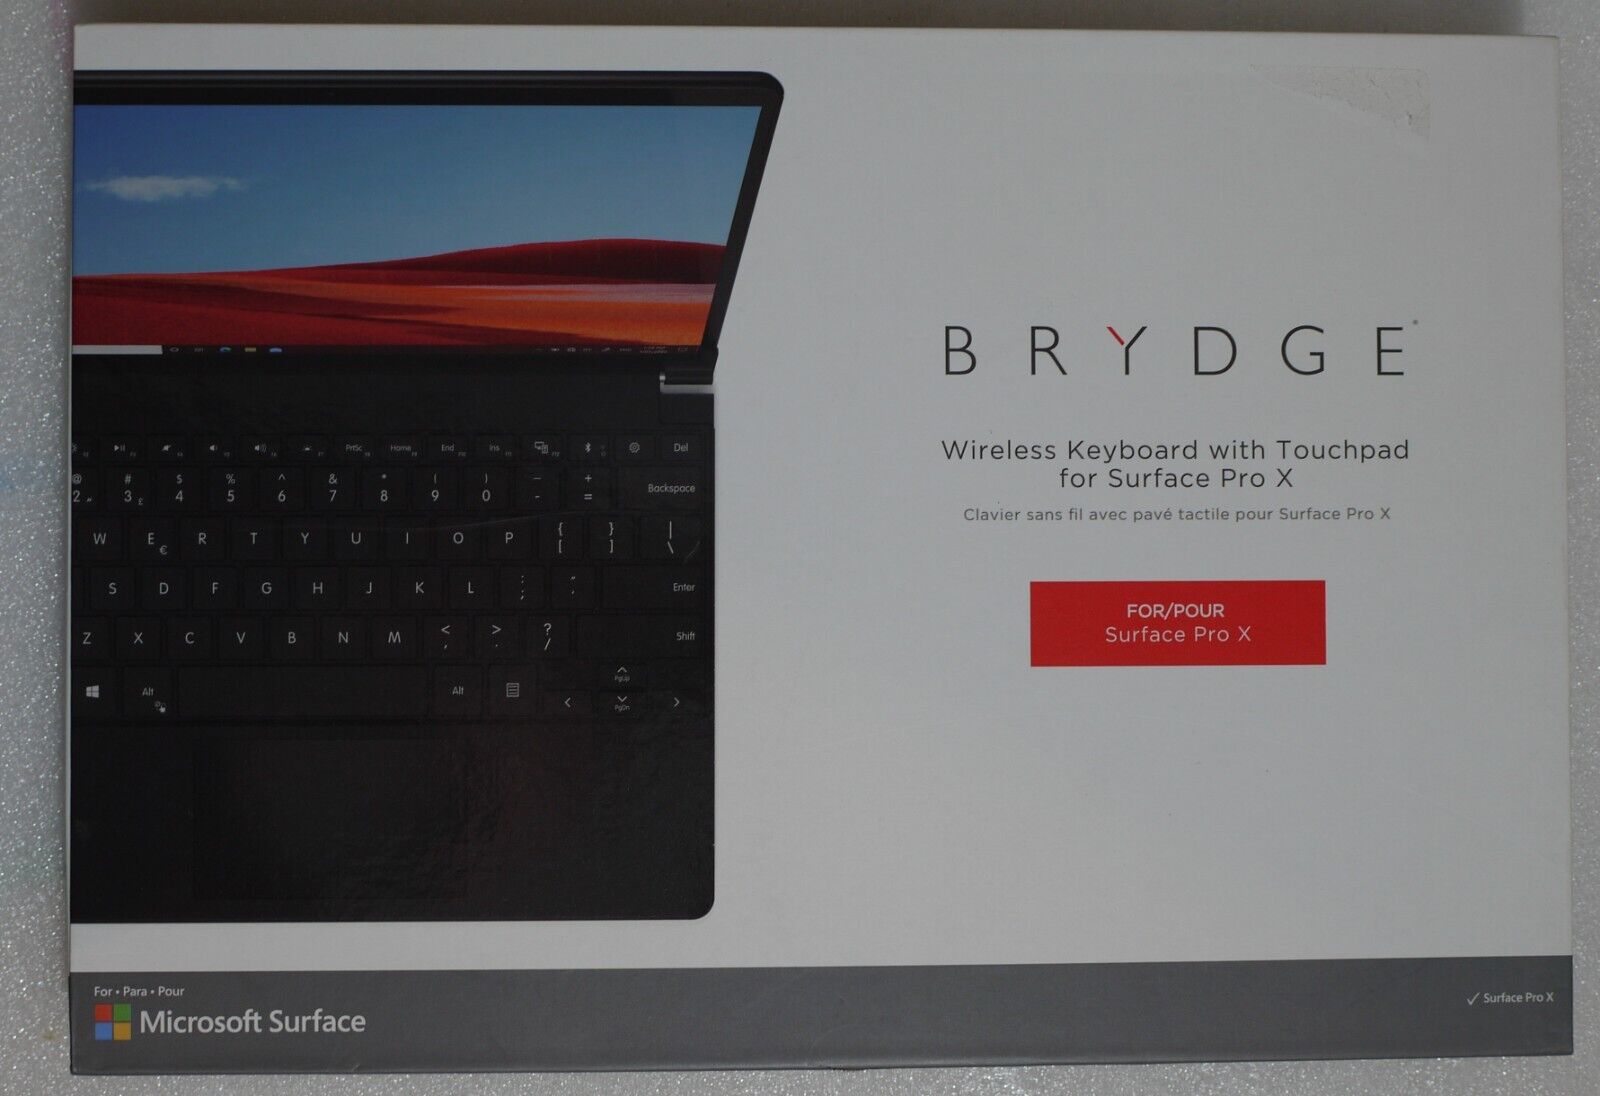 Brydge SPX+ Wireless Keyboard with Touchpad for Surface Pro X BRY7032